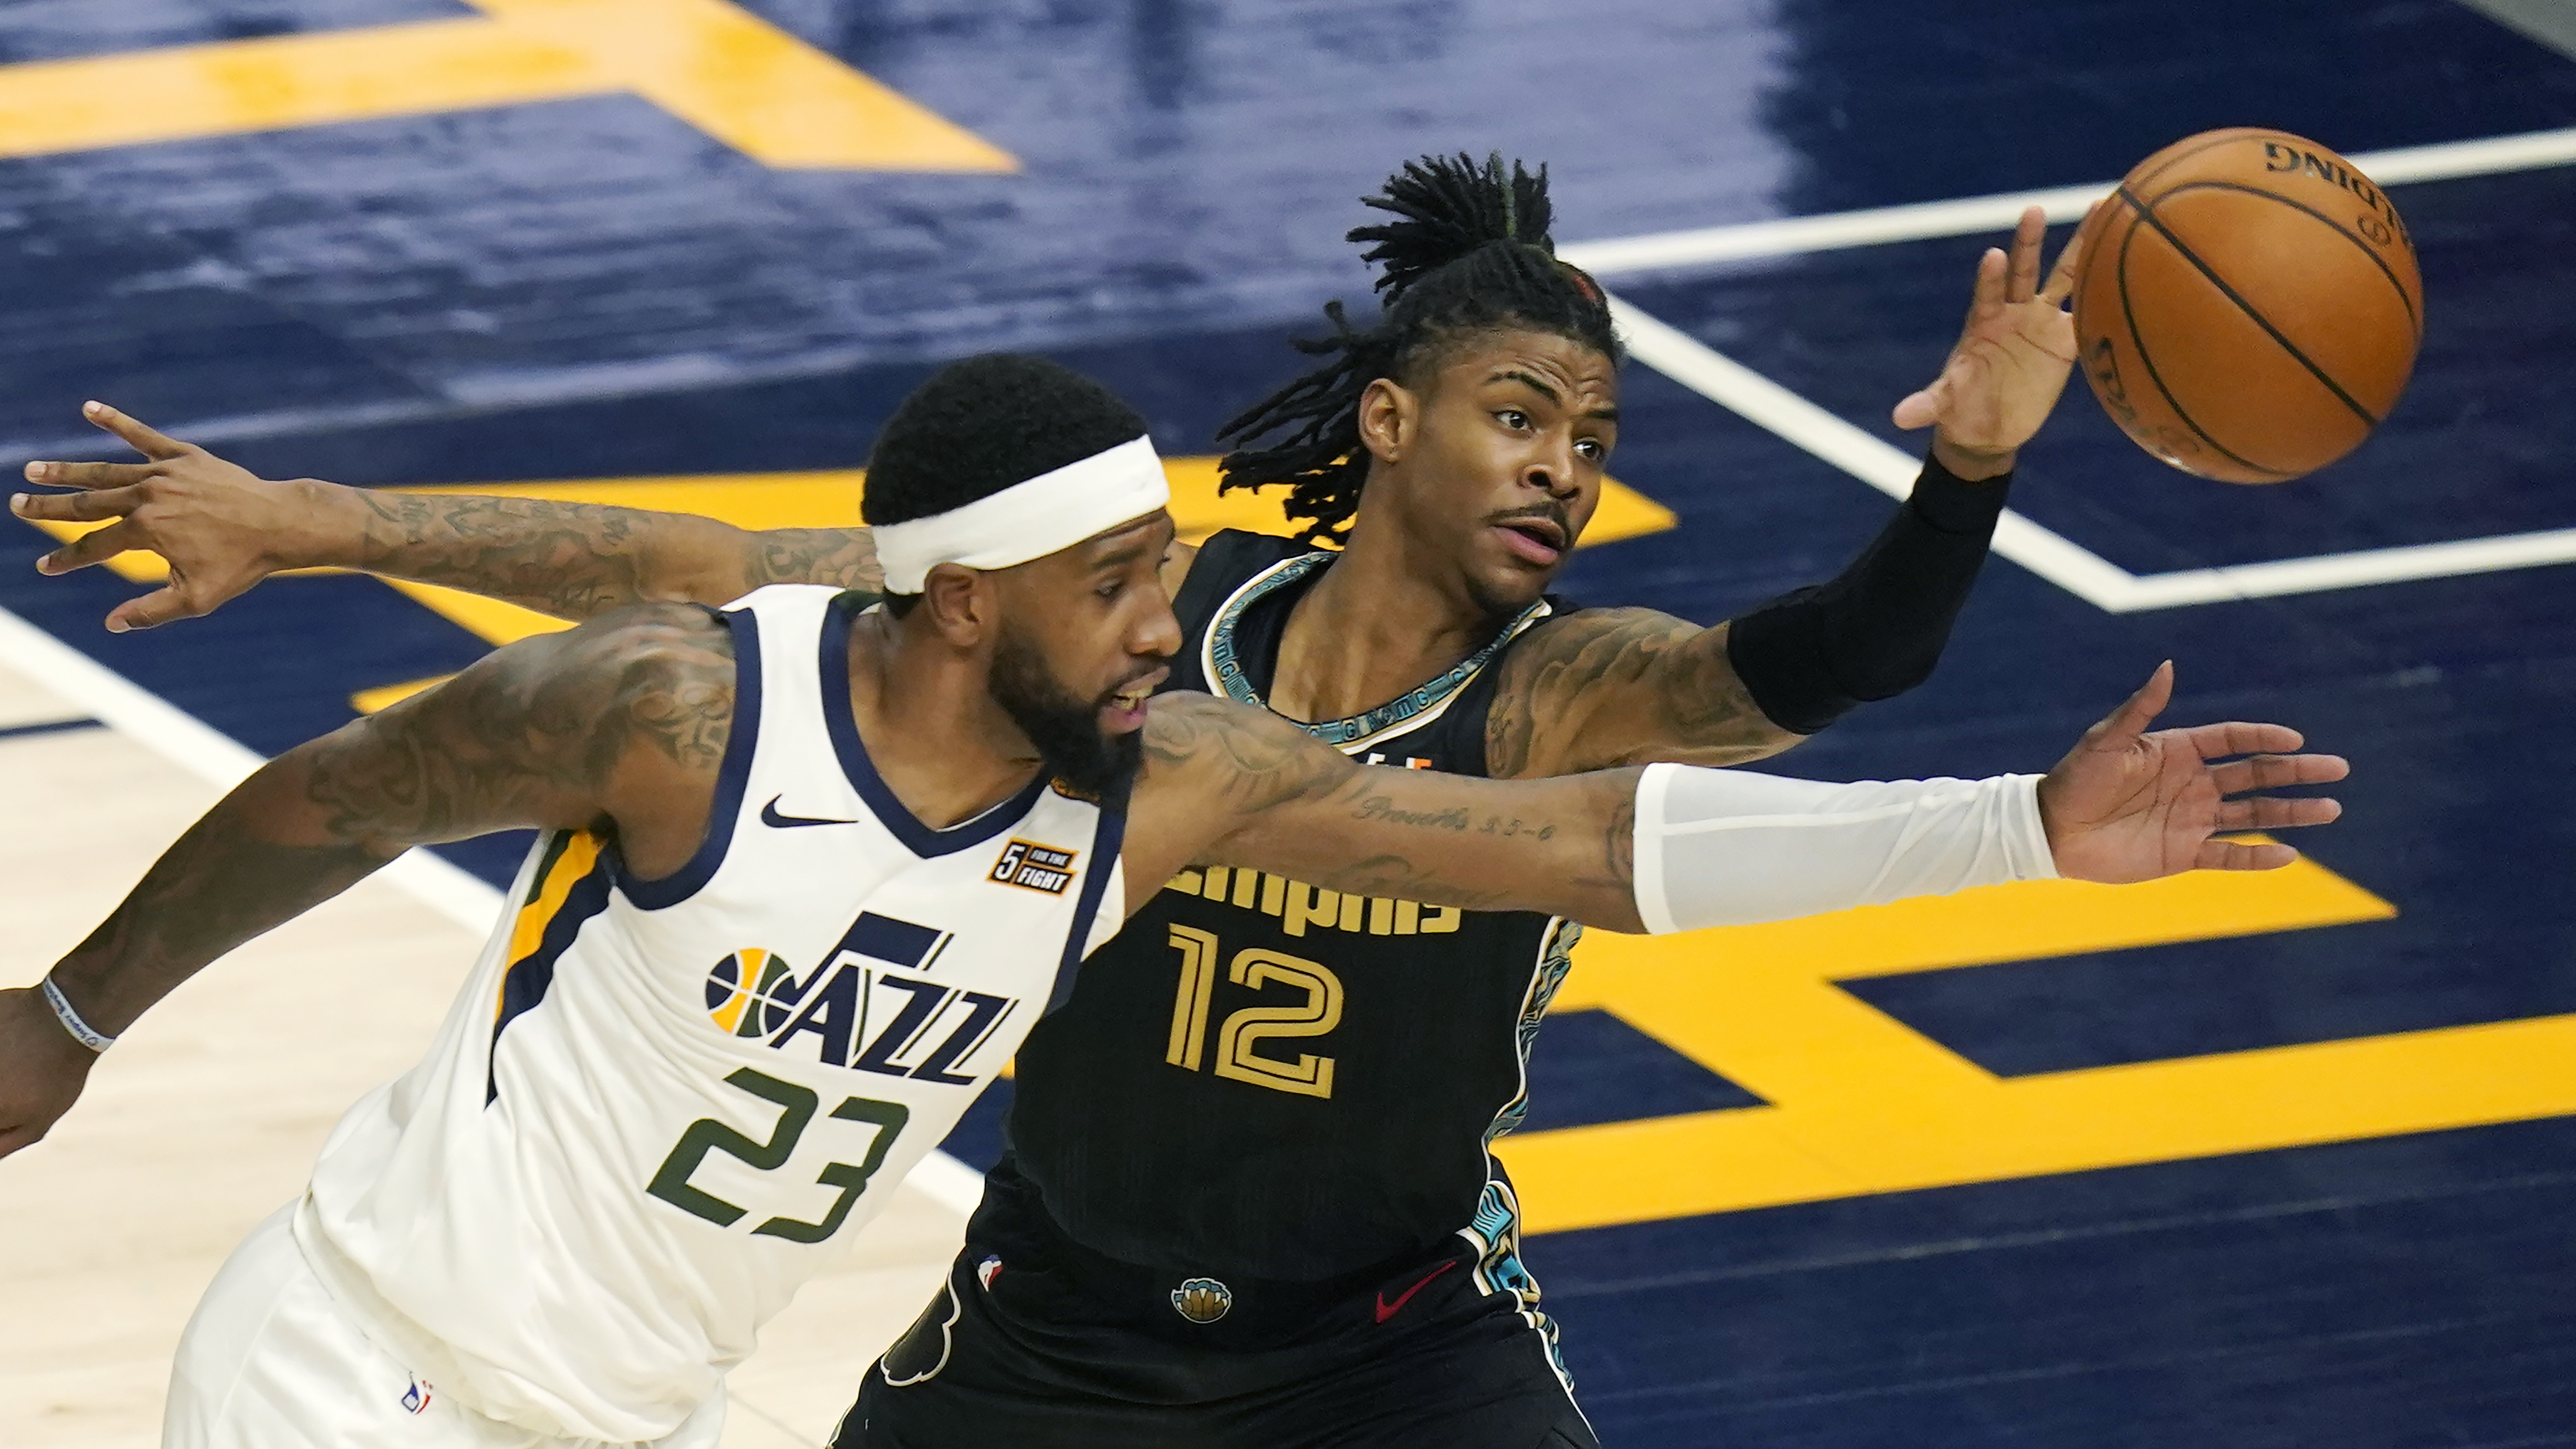 Jazz-Grizzlies Game 2 live stream (5/26) How to watch NBA playoffs online, TV, time